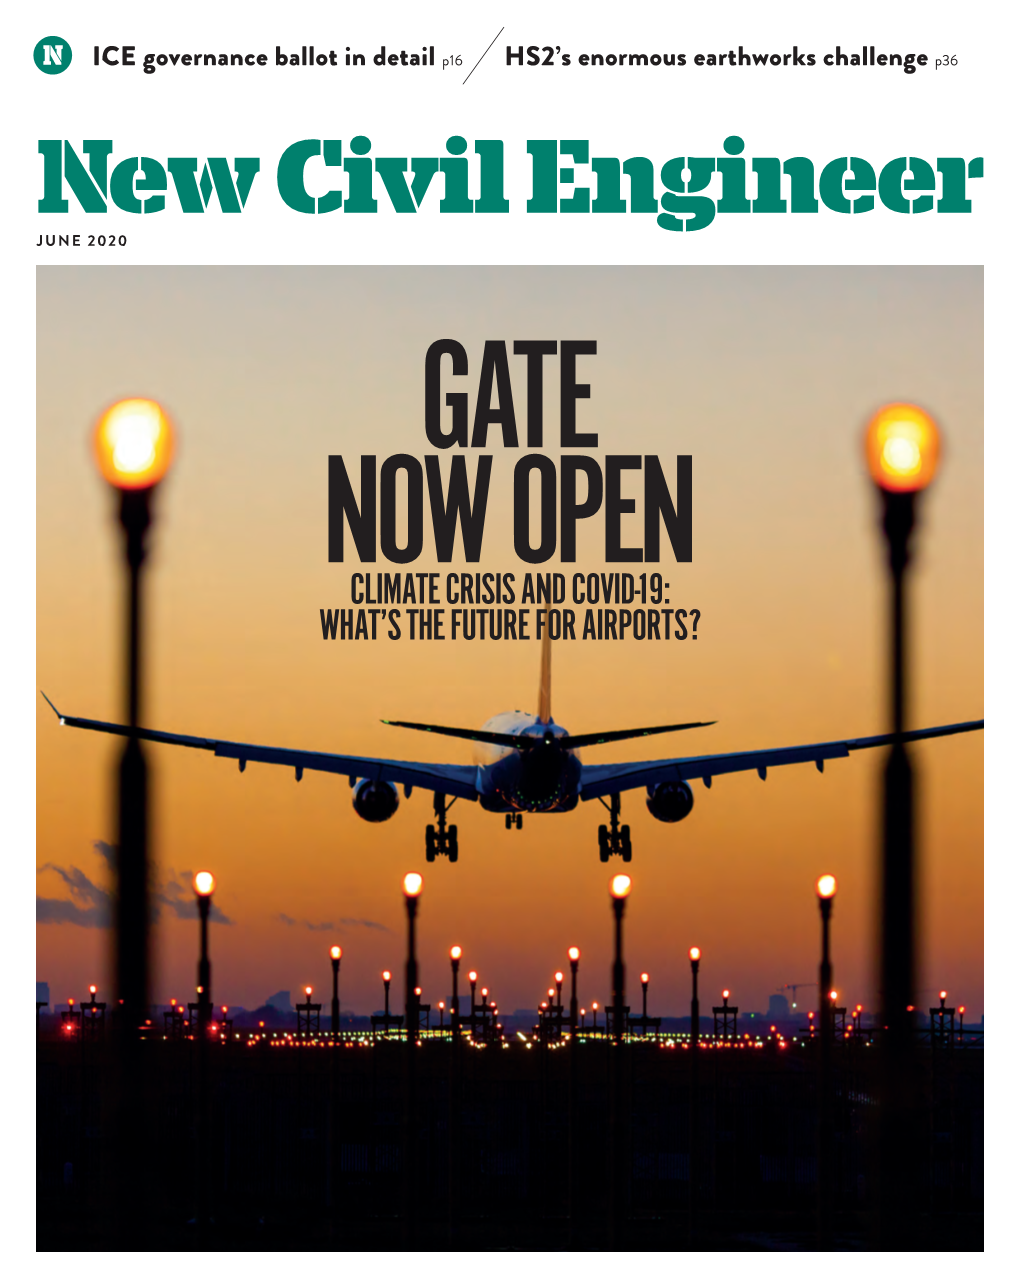 New Civil Engineer JUNE 2020 GATE NOW OPEN CLIMATE CRISIS and COVID-19: WHAT’S the FUTURE for AIRPORTS? Q-BIC PLUS